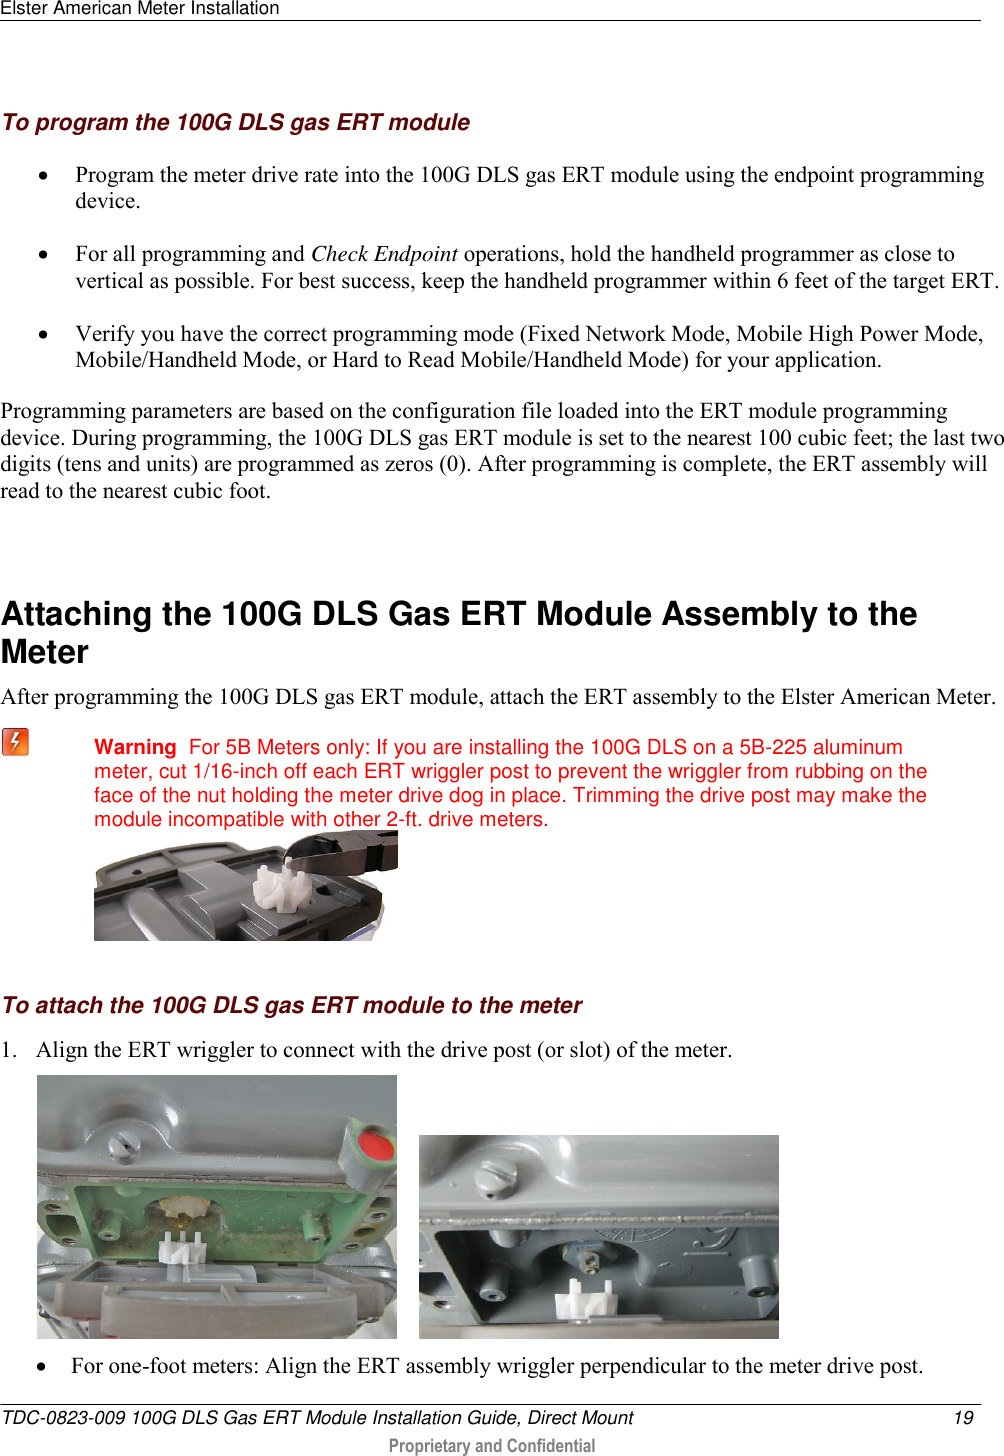 Elster American Meter Installation   TDC-0823-009 100G DLS Gas ERT Module Installation Guide, Direct Mount  19   Proprietary and Confidential     To program the 100G DLS gas ERT module  Program the meter drive rate into the 100G DLS gas ERT module using the endpoint programming device.   For all programming and Check Endpoint operations, hold the handheld programmer as close to vertical as possible. For best success, keep the handheld programmer within 6 feet of the target ERT.  Verify you have the correct programming mode (Fixed Network Mode, Mobile High Power Mode, Mobile/Handheld Mode, or Hard to Read Mobile/Handheld Mode) for your application.  Programming parameters are based on the configuration file loaded into the ERT module programming device. During programming, the 100G DLS gas ERT module is set to the nearest 100 cubic feet; the last two digits (tens and units) are programmed as zeros (0). After programming is complete, the ERT assembly will read to the nearest cubic foot.    Attaching the 100G DLS Gas ERT Module Assembly to the Meter After programming the 100G DLS gas ERT module, attach the ERT assembly to the Elster American Meter.  Warning  For 5B Meters only: If you are installing the 100G DLS on a 5B-225 aluminum meter, cut 1/16-inch off each ERT wriggler post to prevent the wriggler from rubbing on the face of the nut holding the meter drive dog in place. Trimming the drive post may make the module incompatible with other 2-ft. drive meters.    To attach the 100G DLS gas ERT module to the meter 1. Align the ERT wriggler to connect with the drive post (or slot) of the meter.        For one-foot meters: Align the ERT assembly wriggler perpendicular to the meter drive post. 